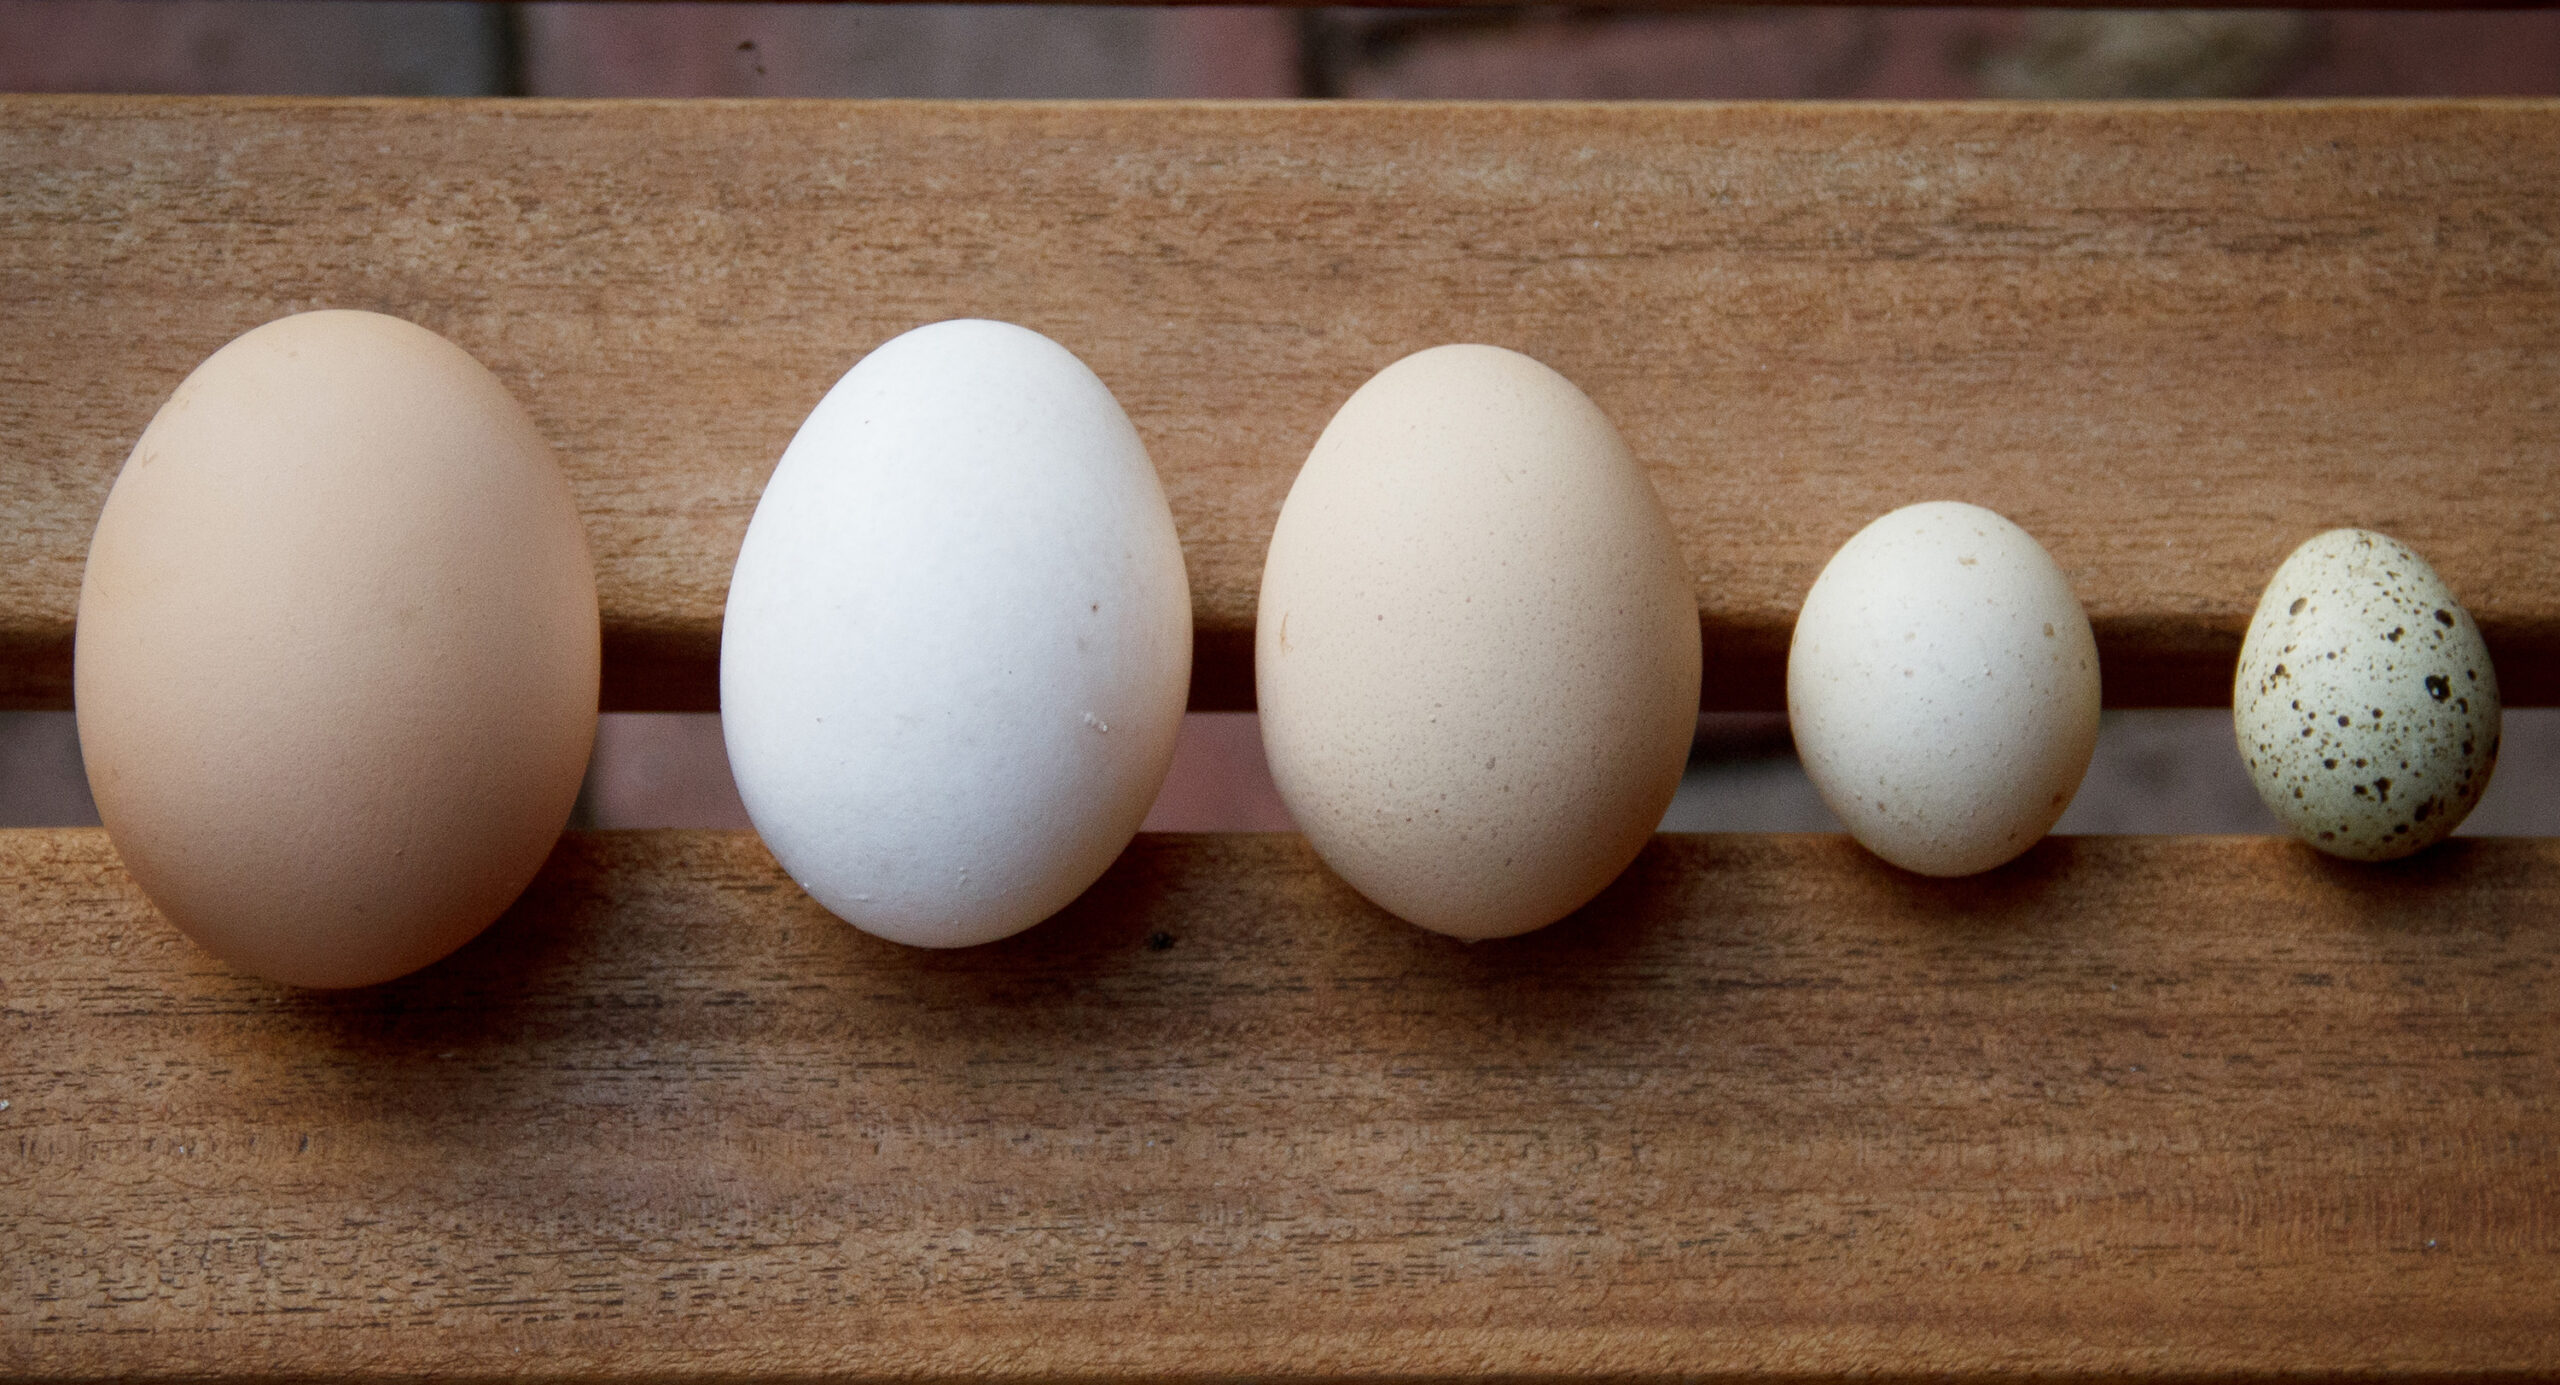 Eggs contain everything required to support a chick’s development in the shell, which takes effort and resources.